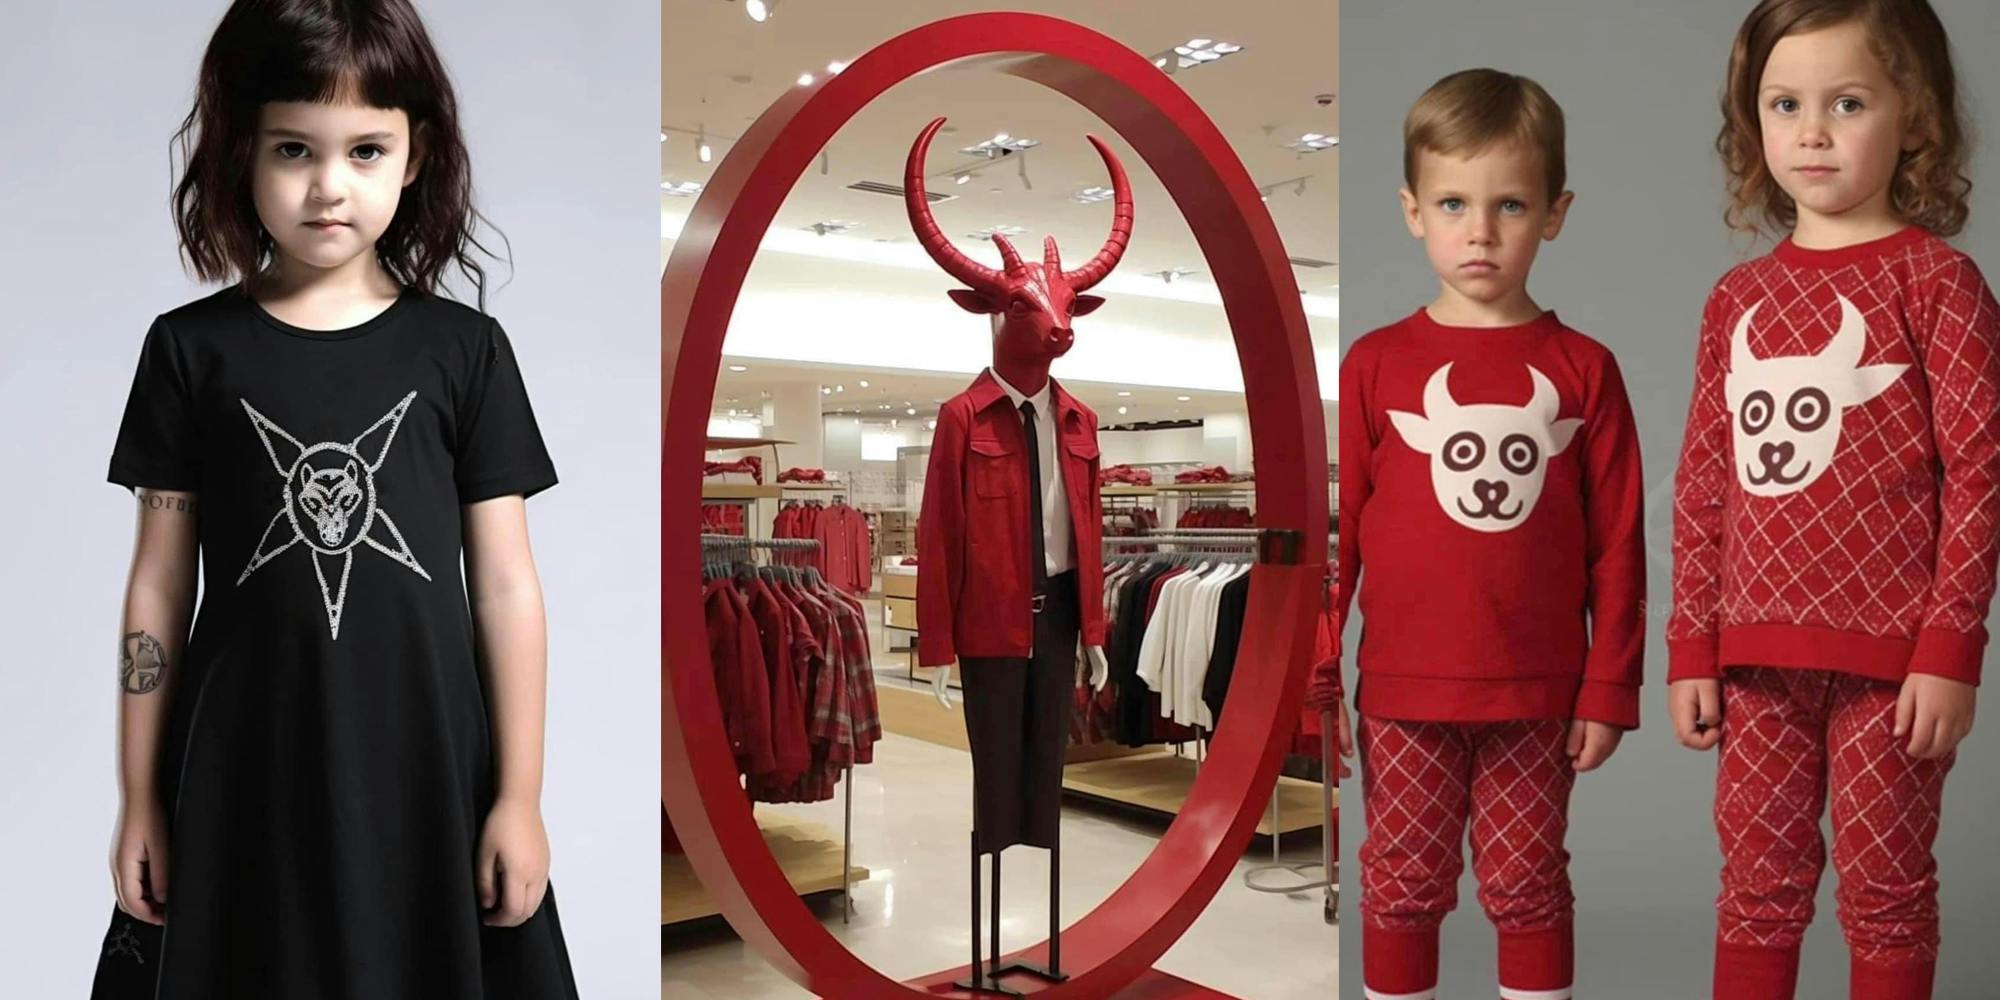 Conservatives Fall For AI-Generated Satanic Clothing at Target